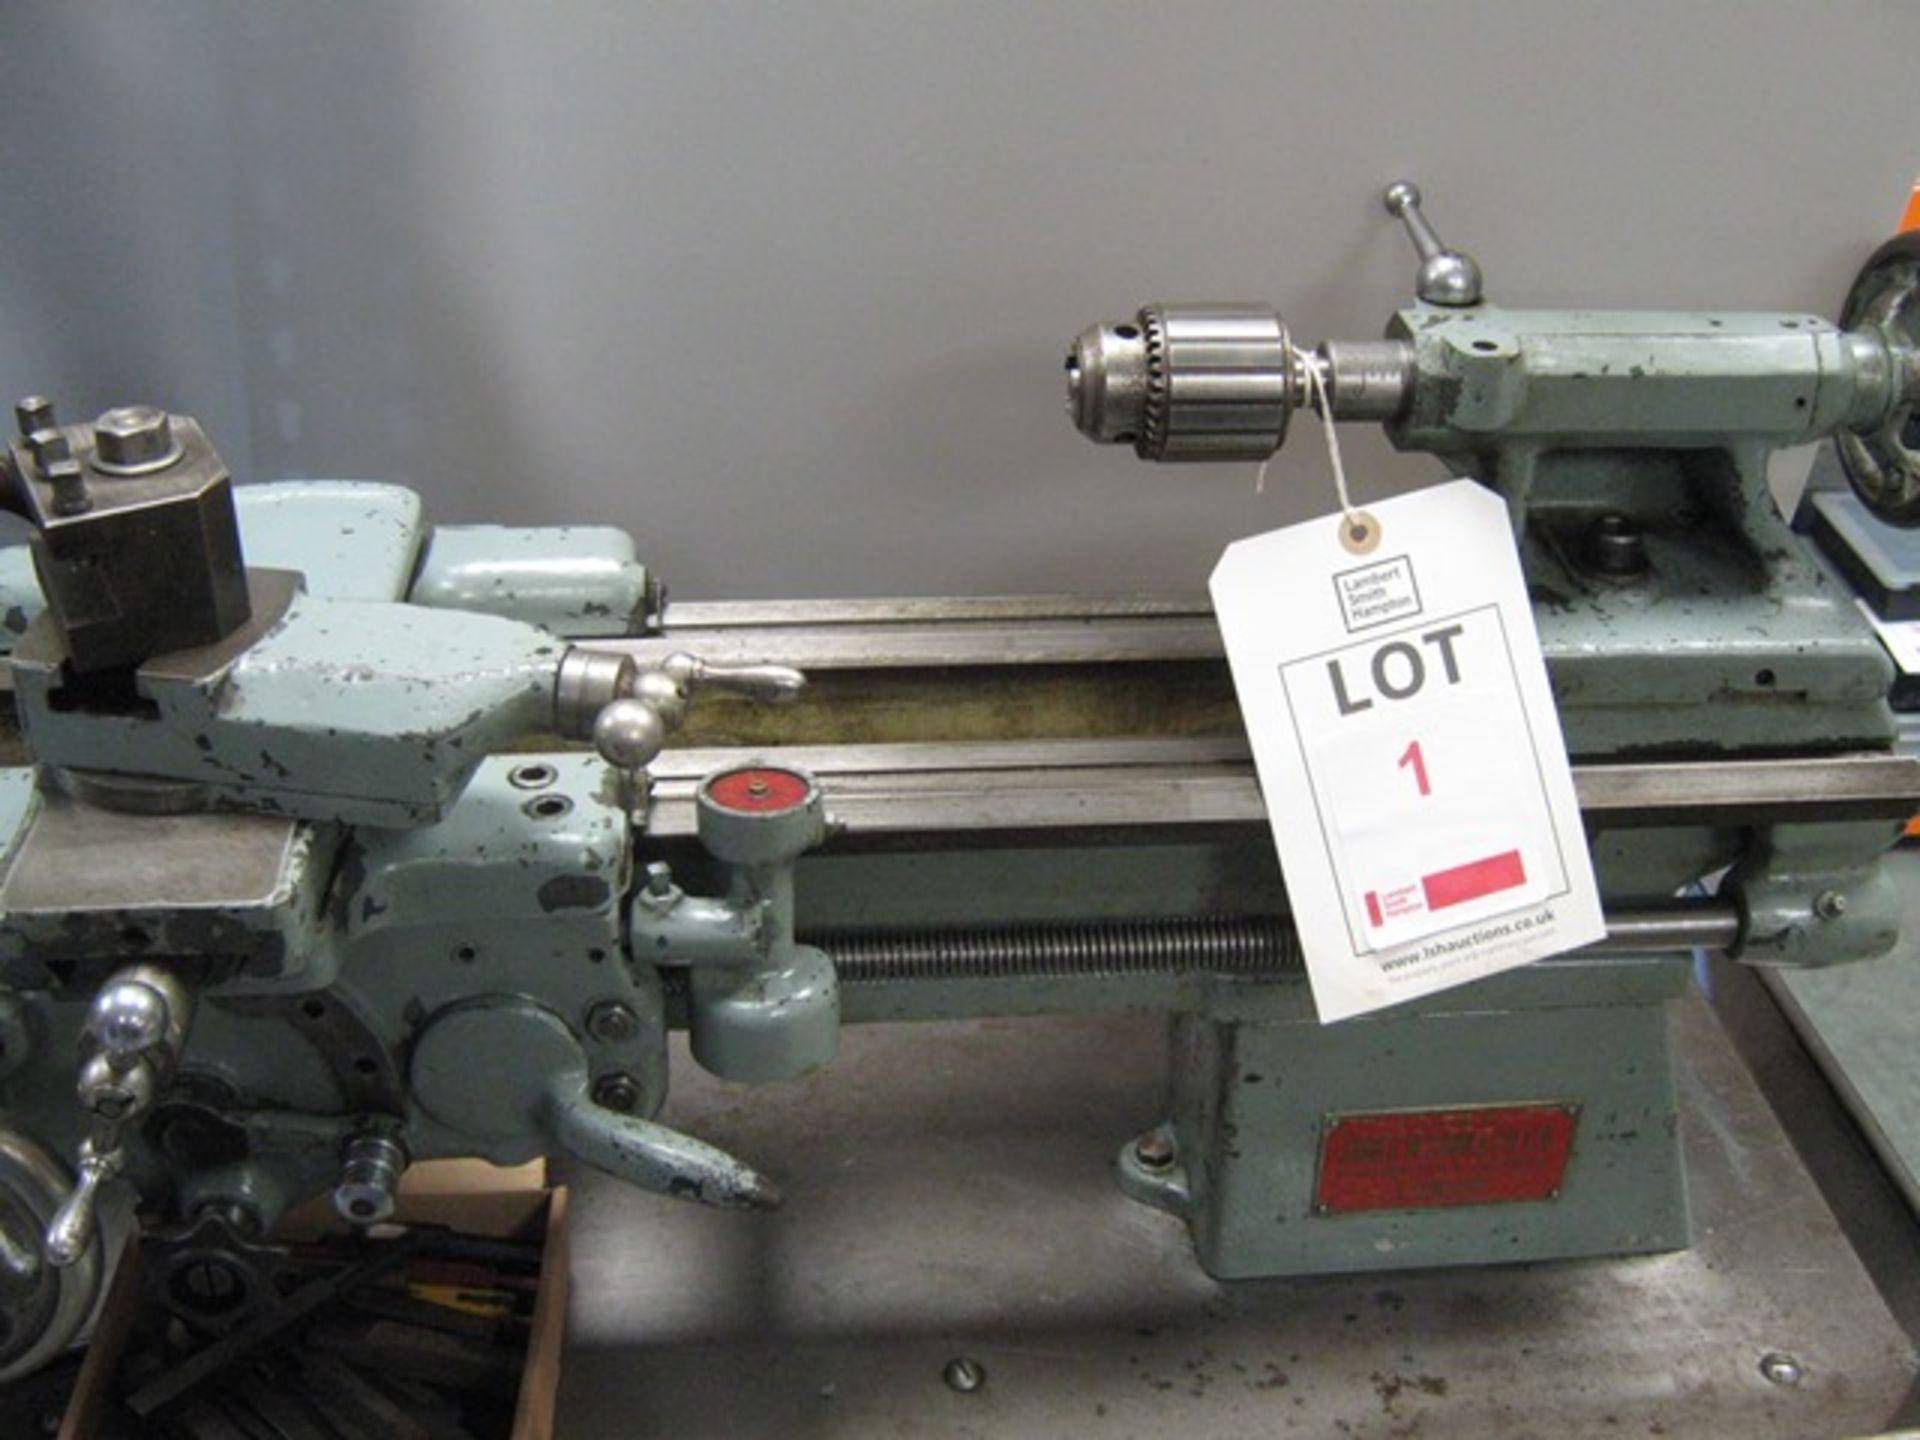 Boxford model A screw cutting lathe, 240v, 4 1/2" x 18"centres Loaded FOC to suitable transport - Image 4 of 5